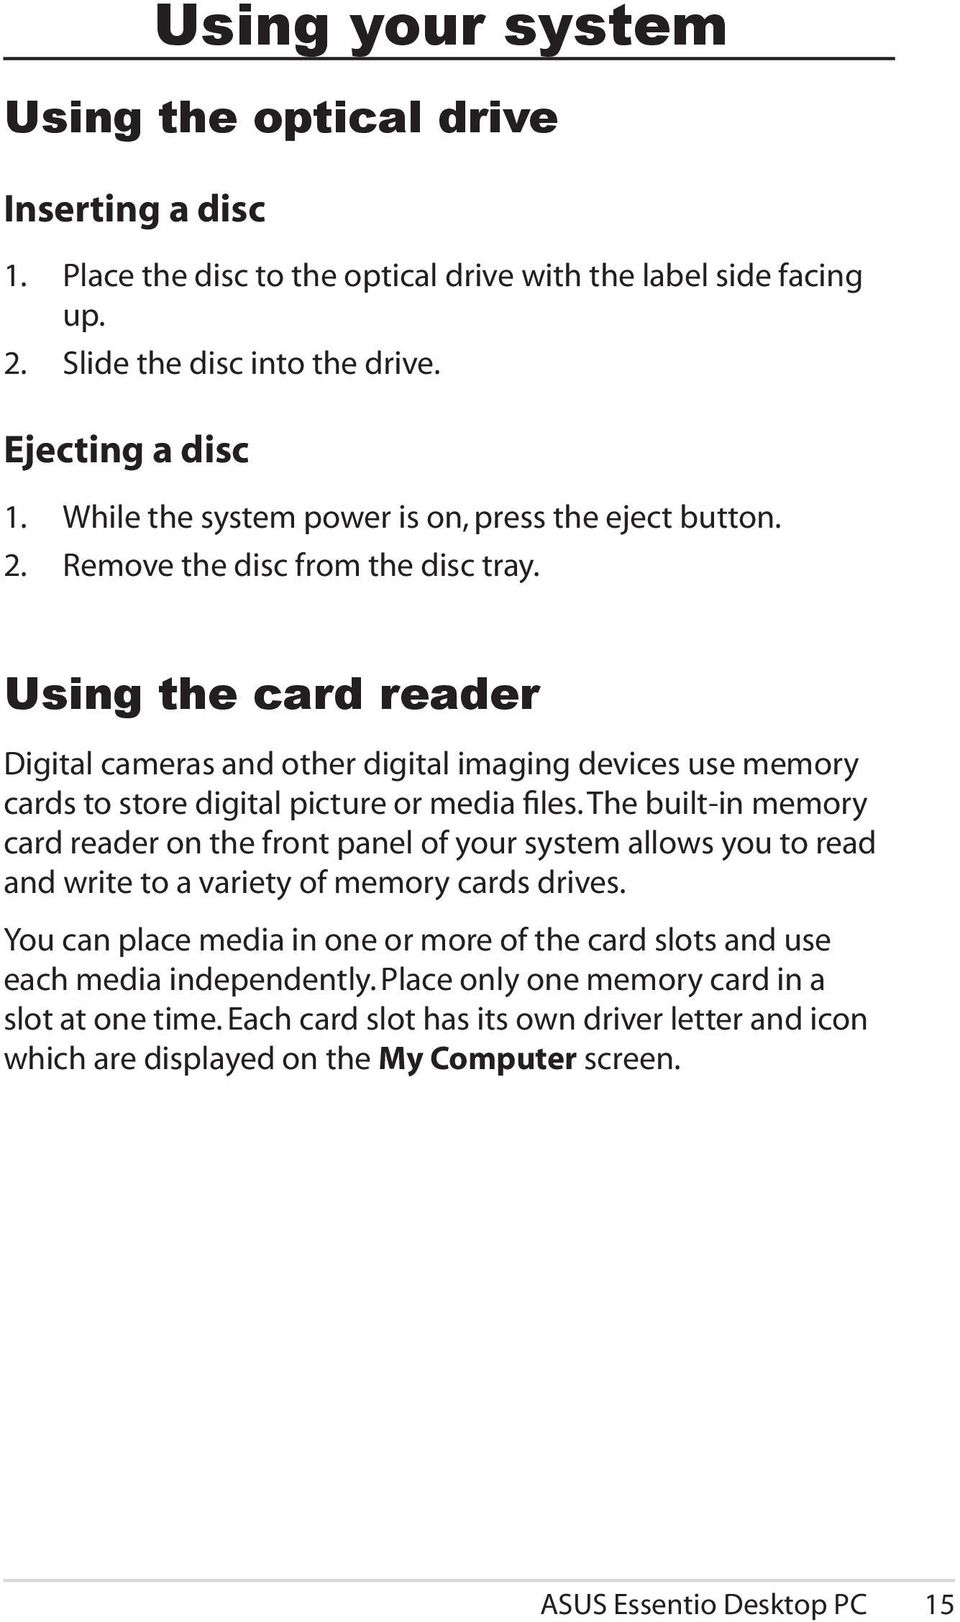 Using the card reader Digital cameras and other digital imaging devices use memory cards to store digital picture or media files.